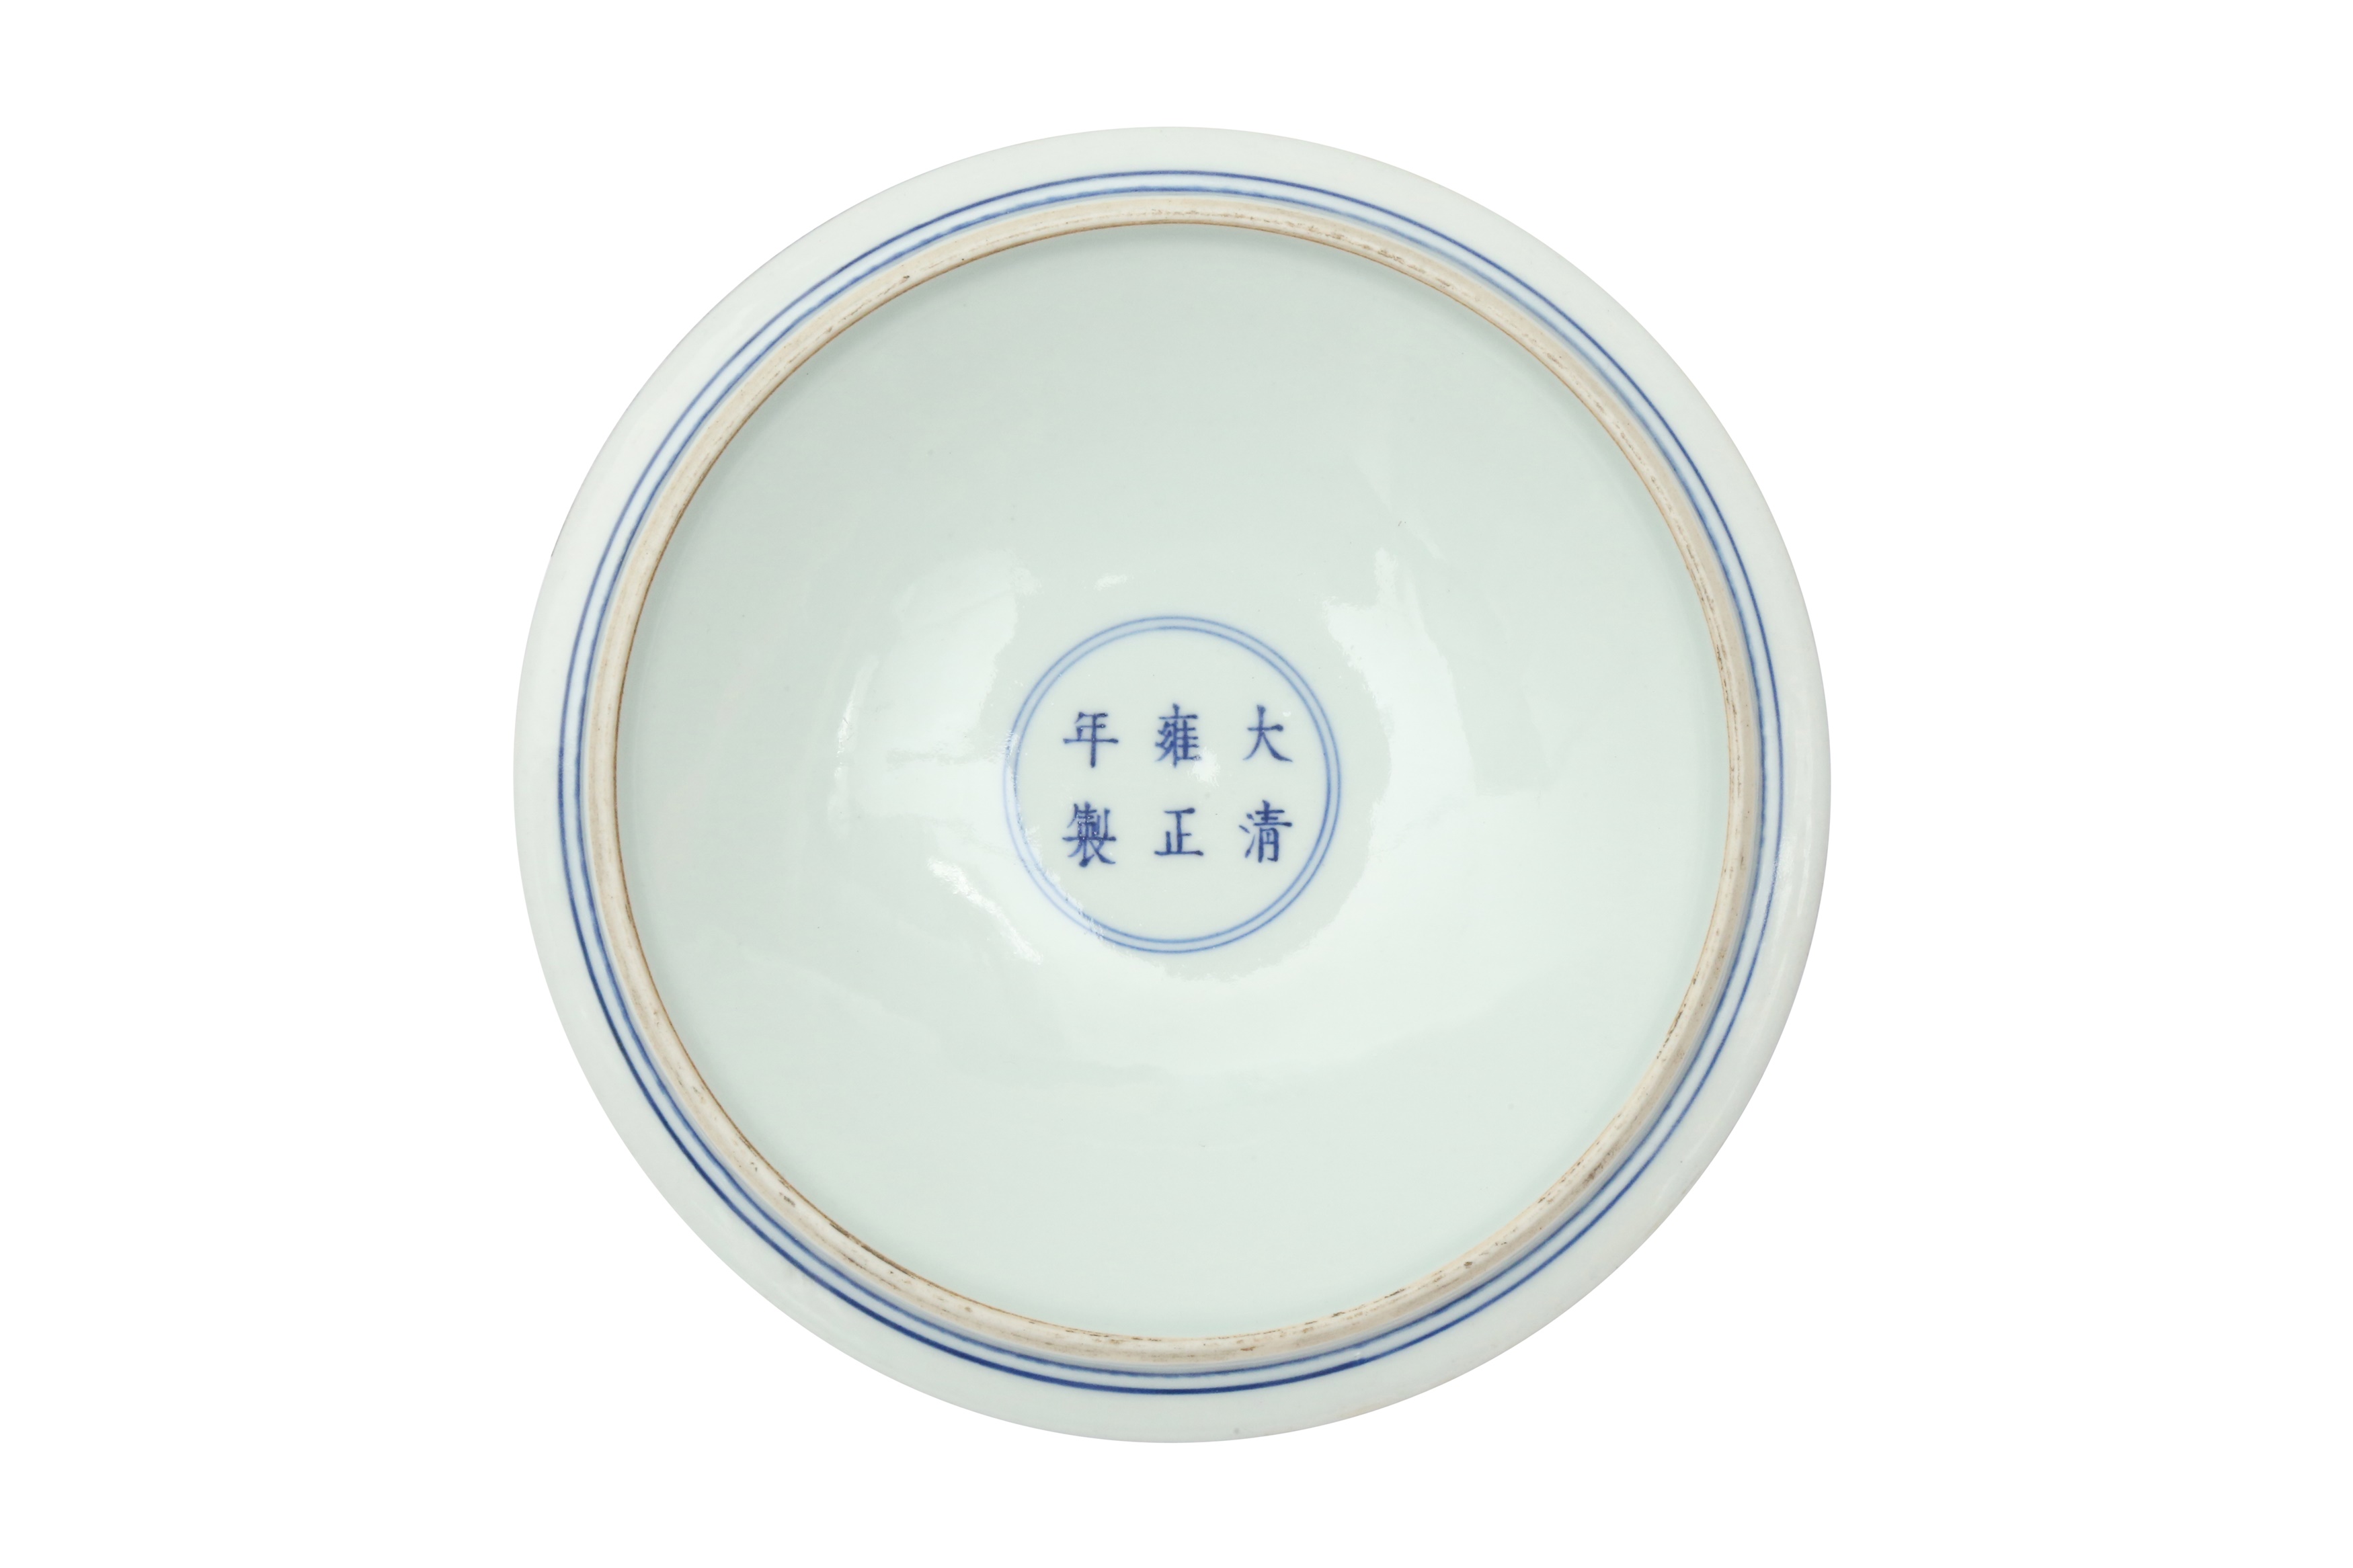 A CHINESE MONOCHROME BLUE-GLAZED BOWL AND COVER 藍釉朱雀鈕蓋盌 - Image 2 of 17